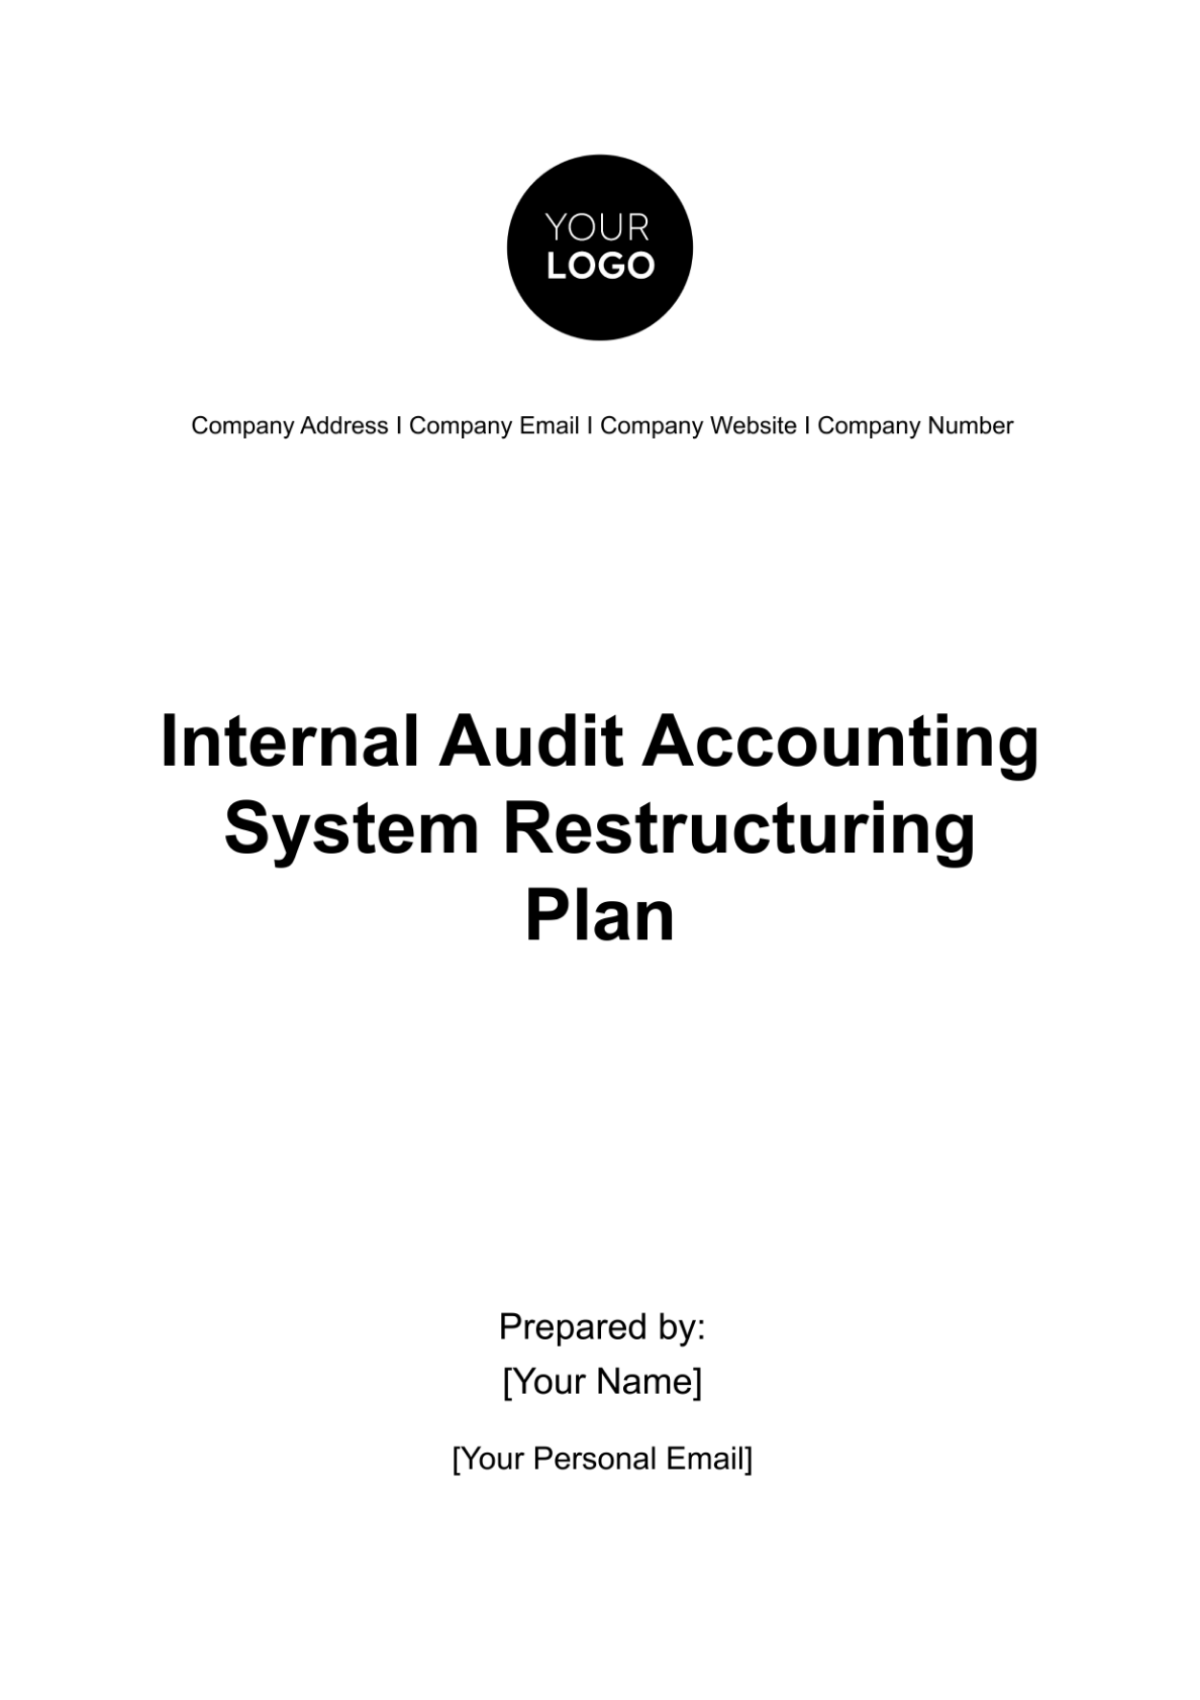 Internal Audit Accounting System Restructuring Plan Template